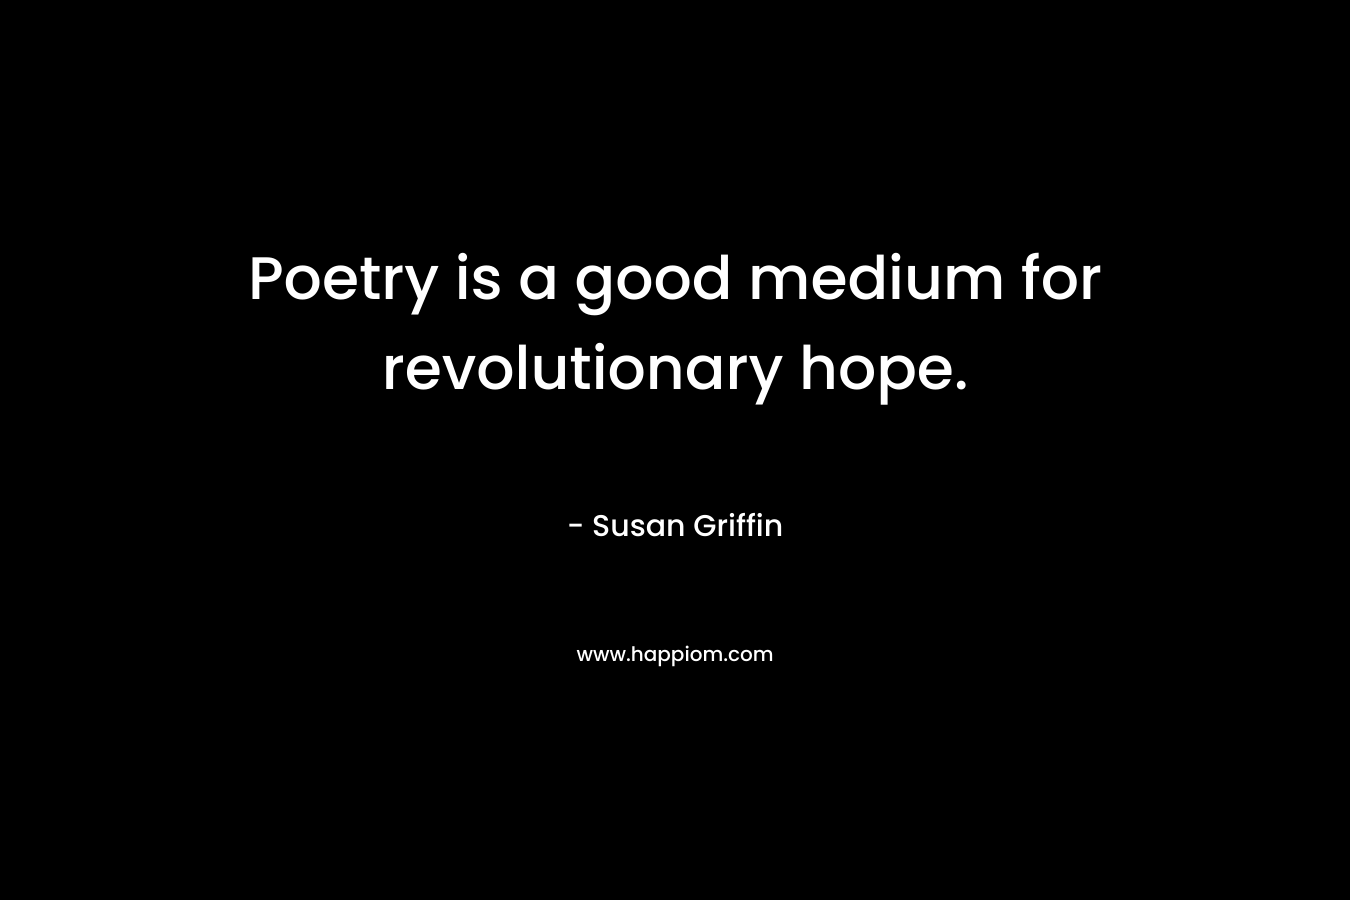 Poetry is a good medium for revolutionary hope. – Susan Griffin